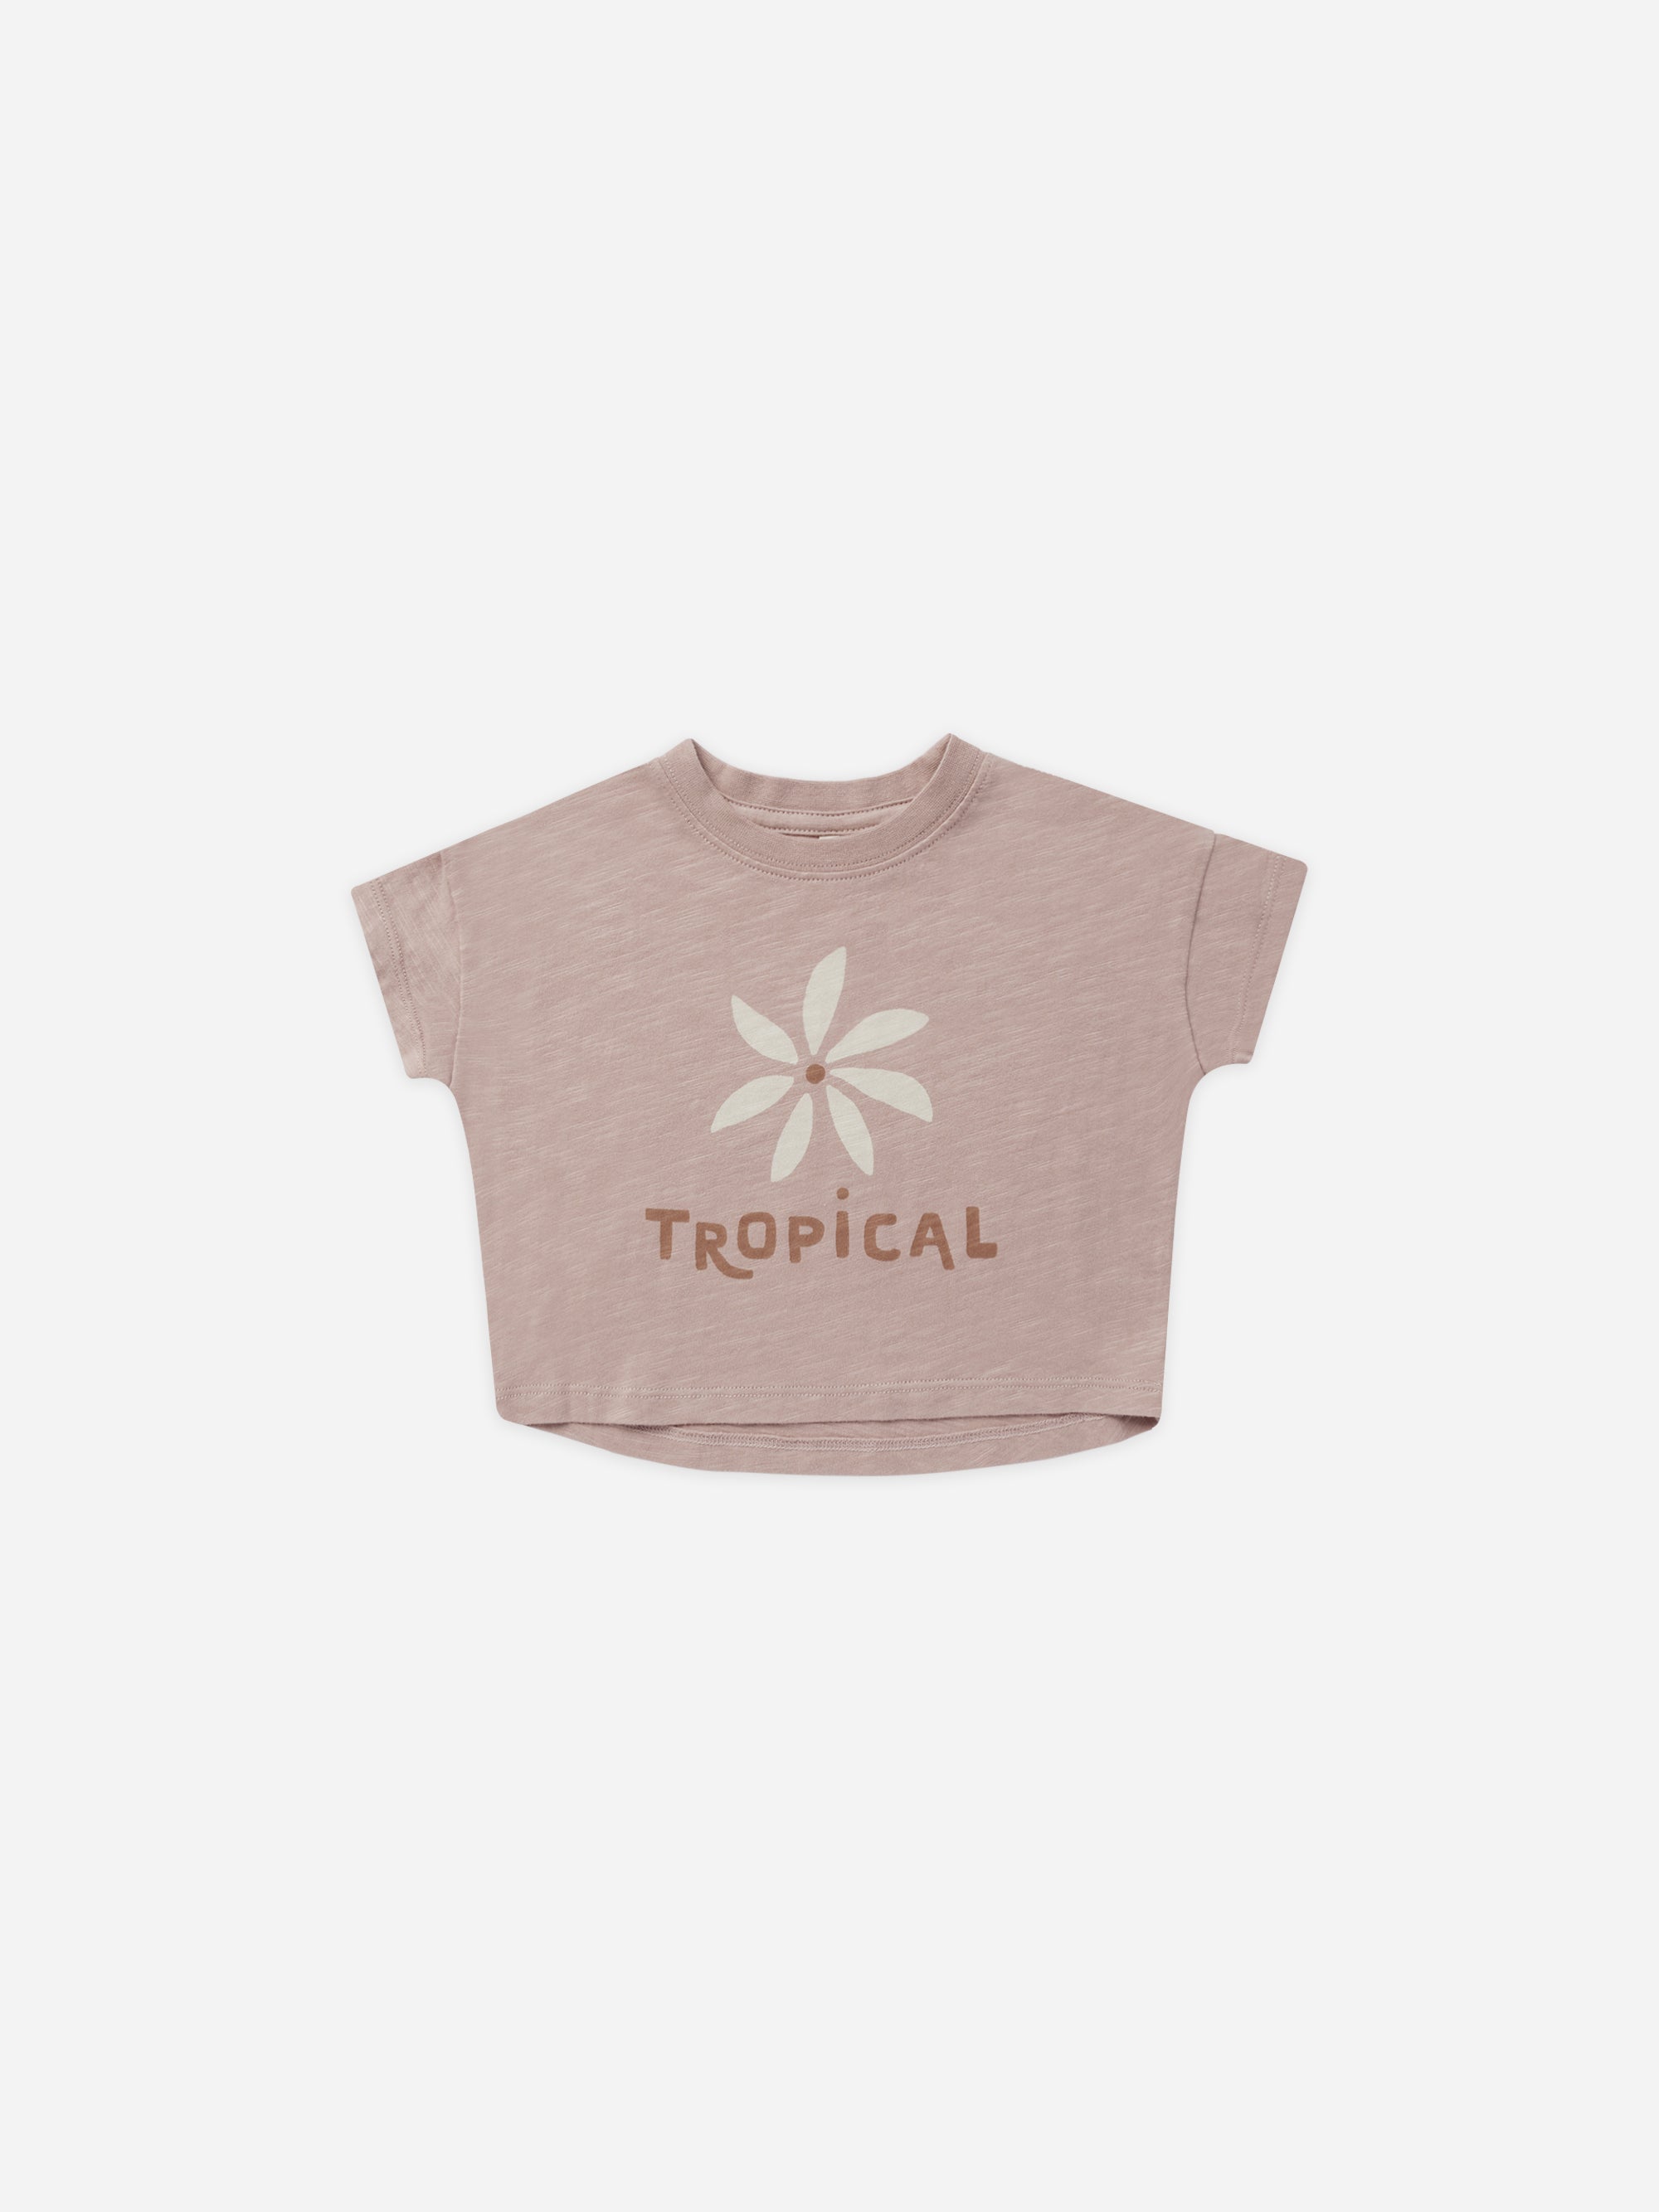 Boxy Tee || Tropical - Rylee + Cru | Kids Clothes | Trendy Baby Clothes | Modern Infant Outfits |